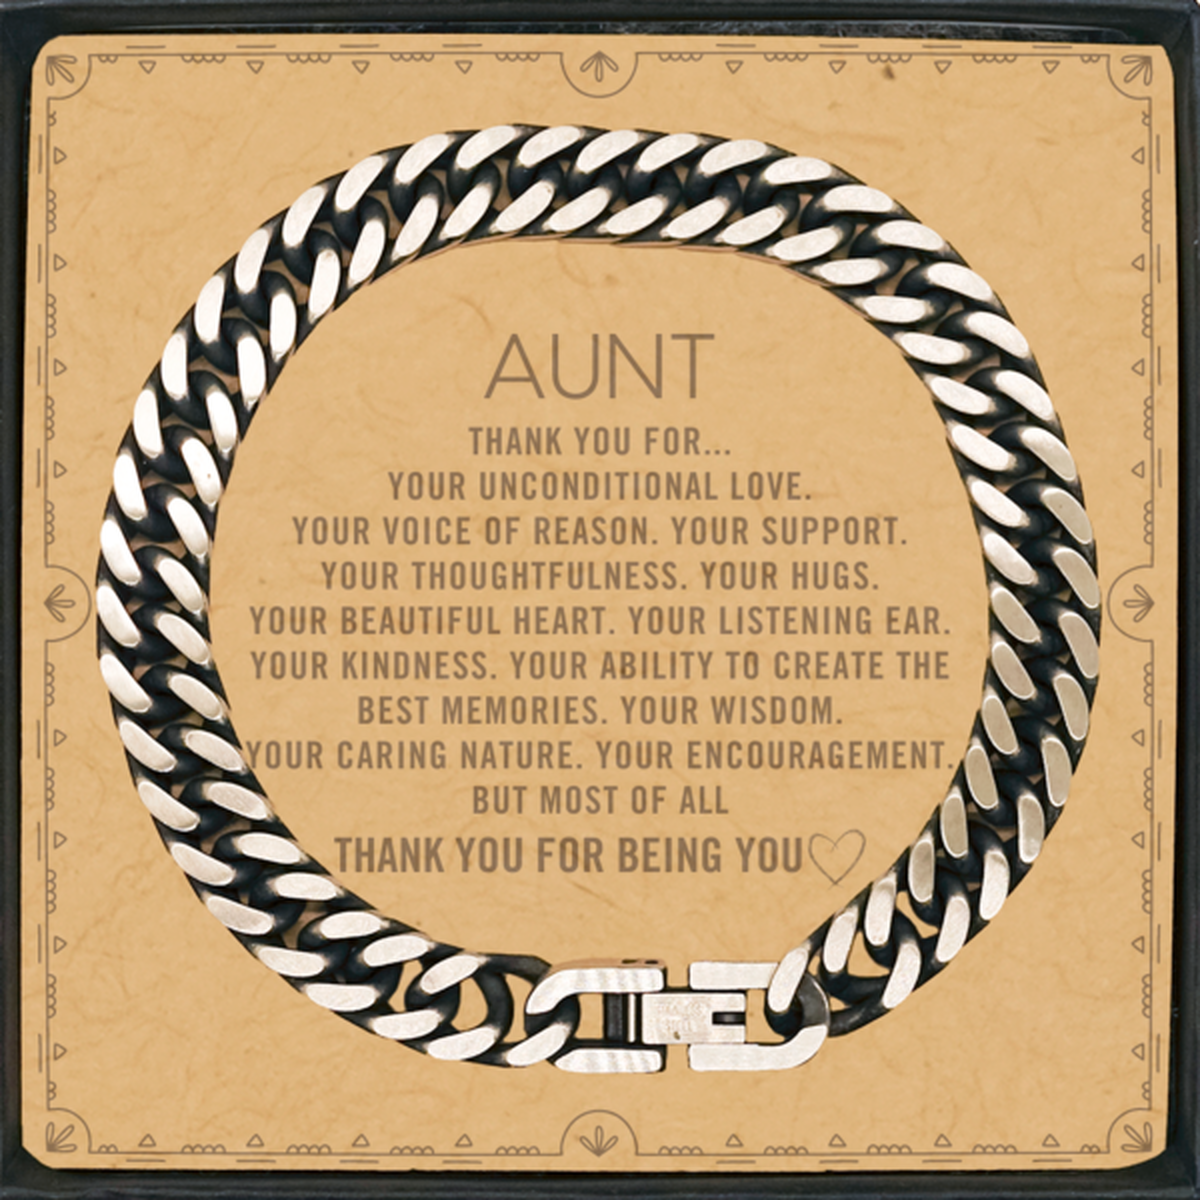 Aunt Cuban Link Chain Bracelet Custom, Message Card Gifts For Aunt Christmas Graduation Birthday Gifts for Men Women Aunt Thank you for Your unconditional love